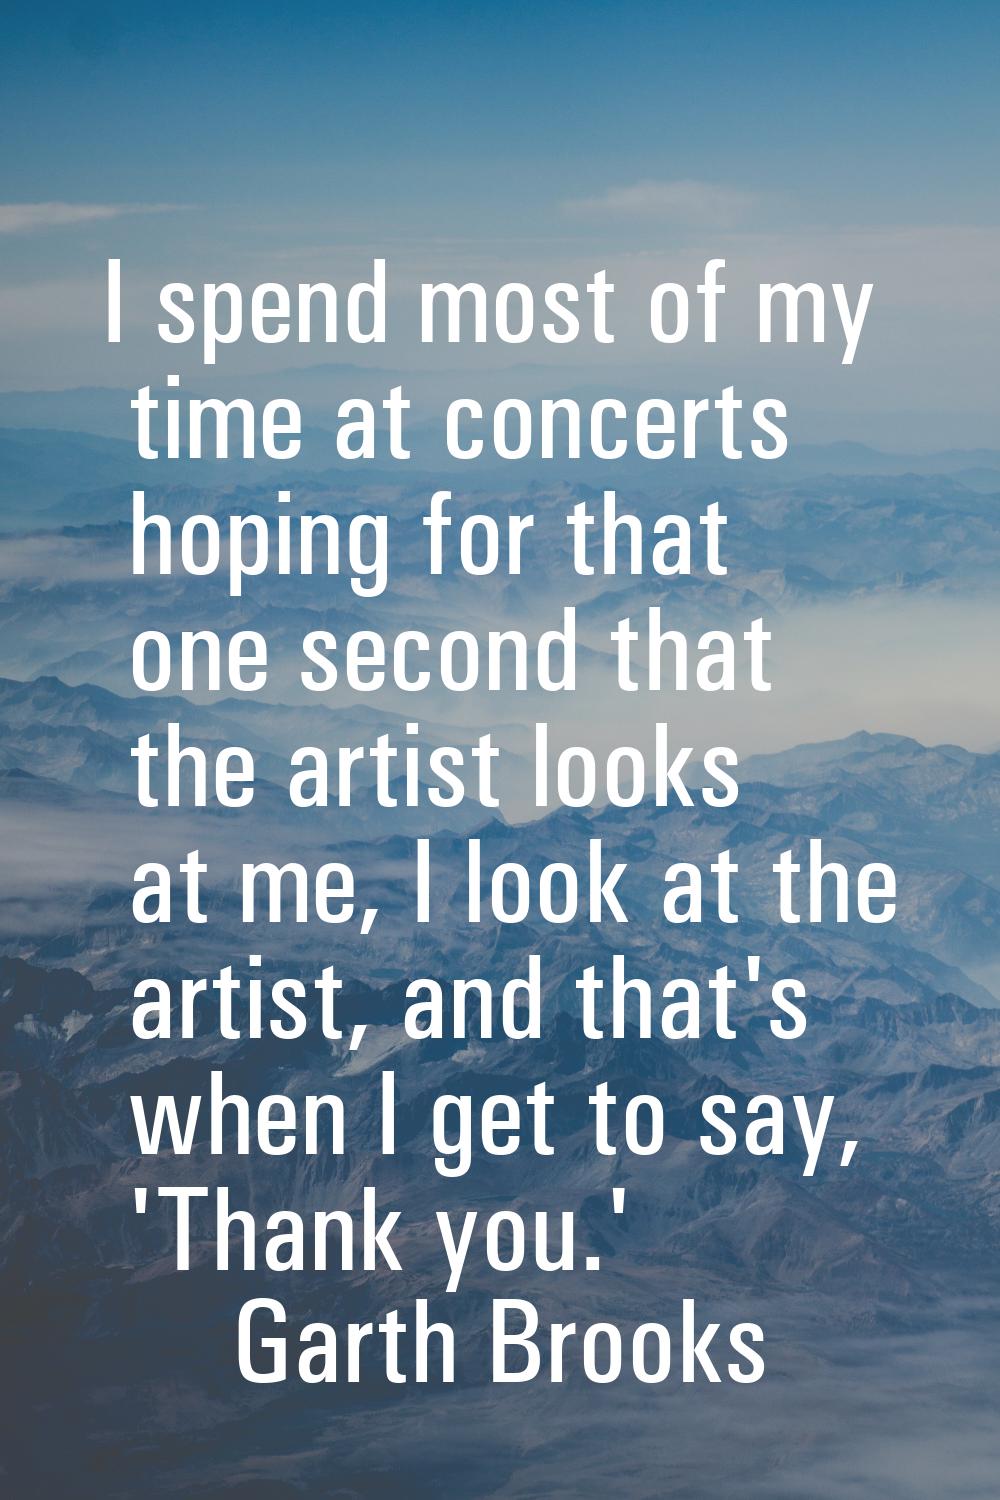 I spend most of my time at concerts hoping for that one second that the artist looks at me, I look 